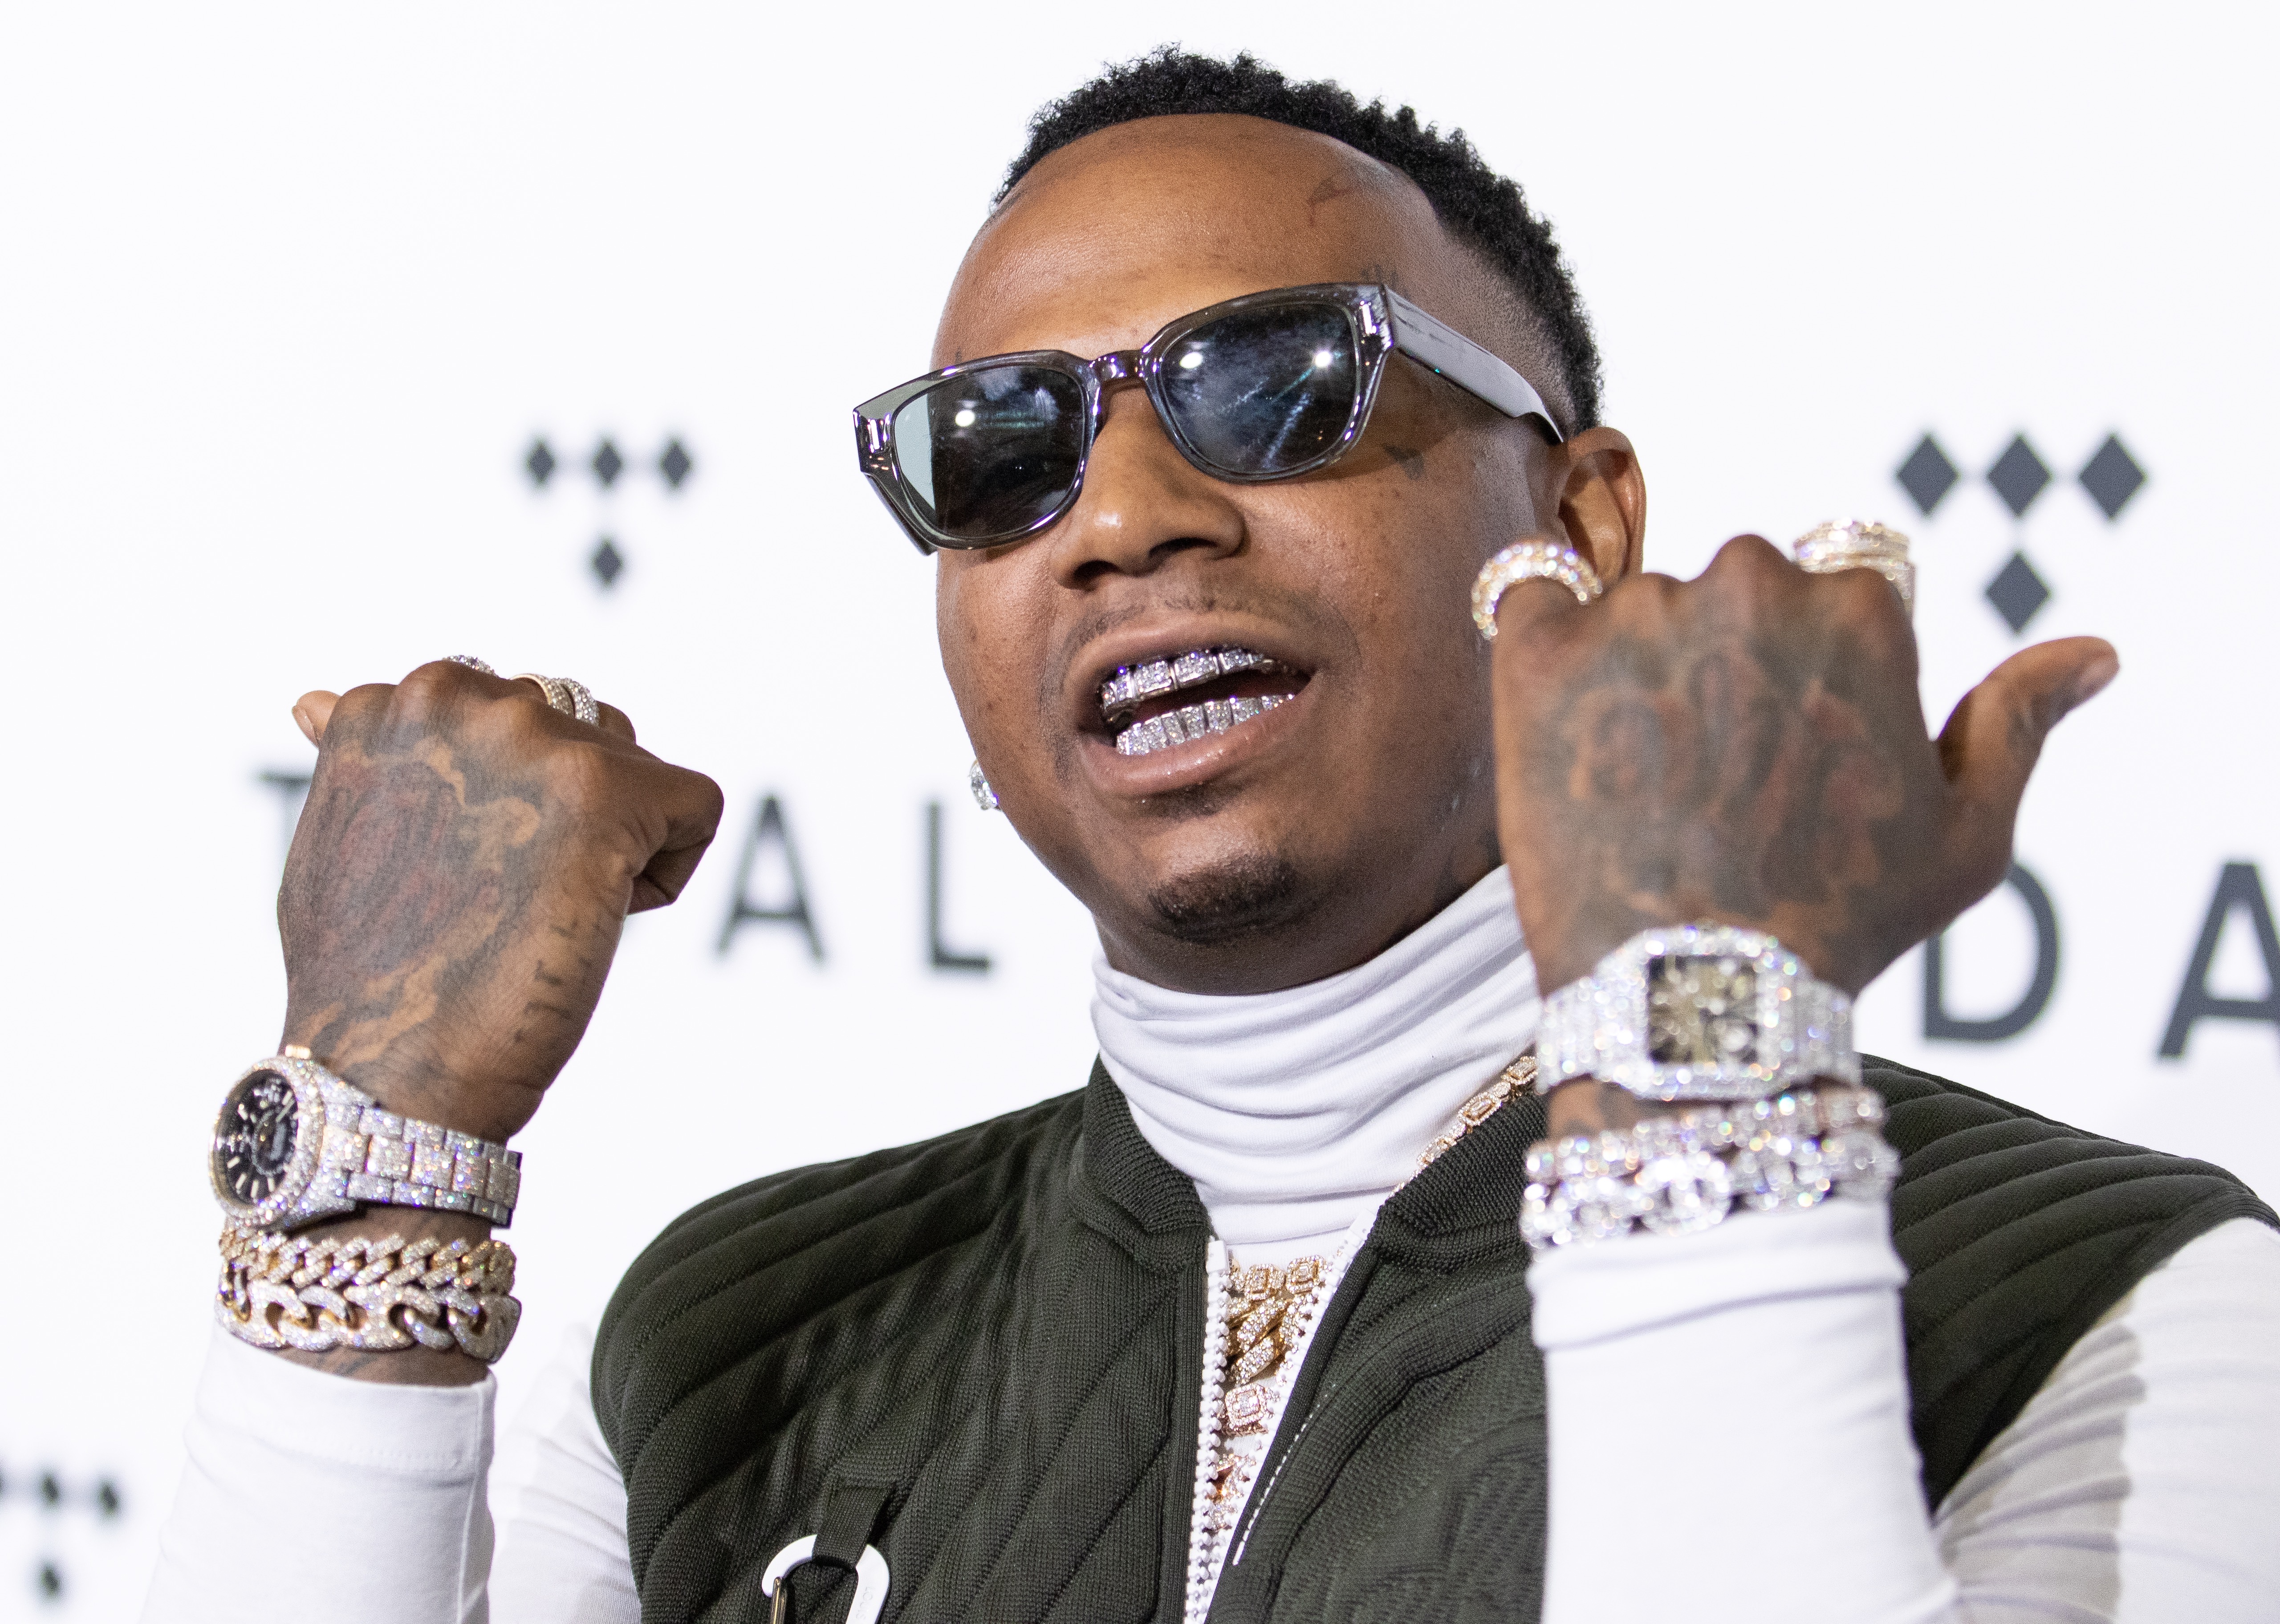 Moneybagg Yo makes a statement on 'A Gangsta's Pain Reloaded